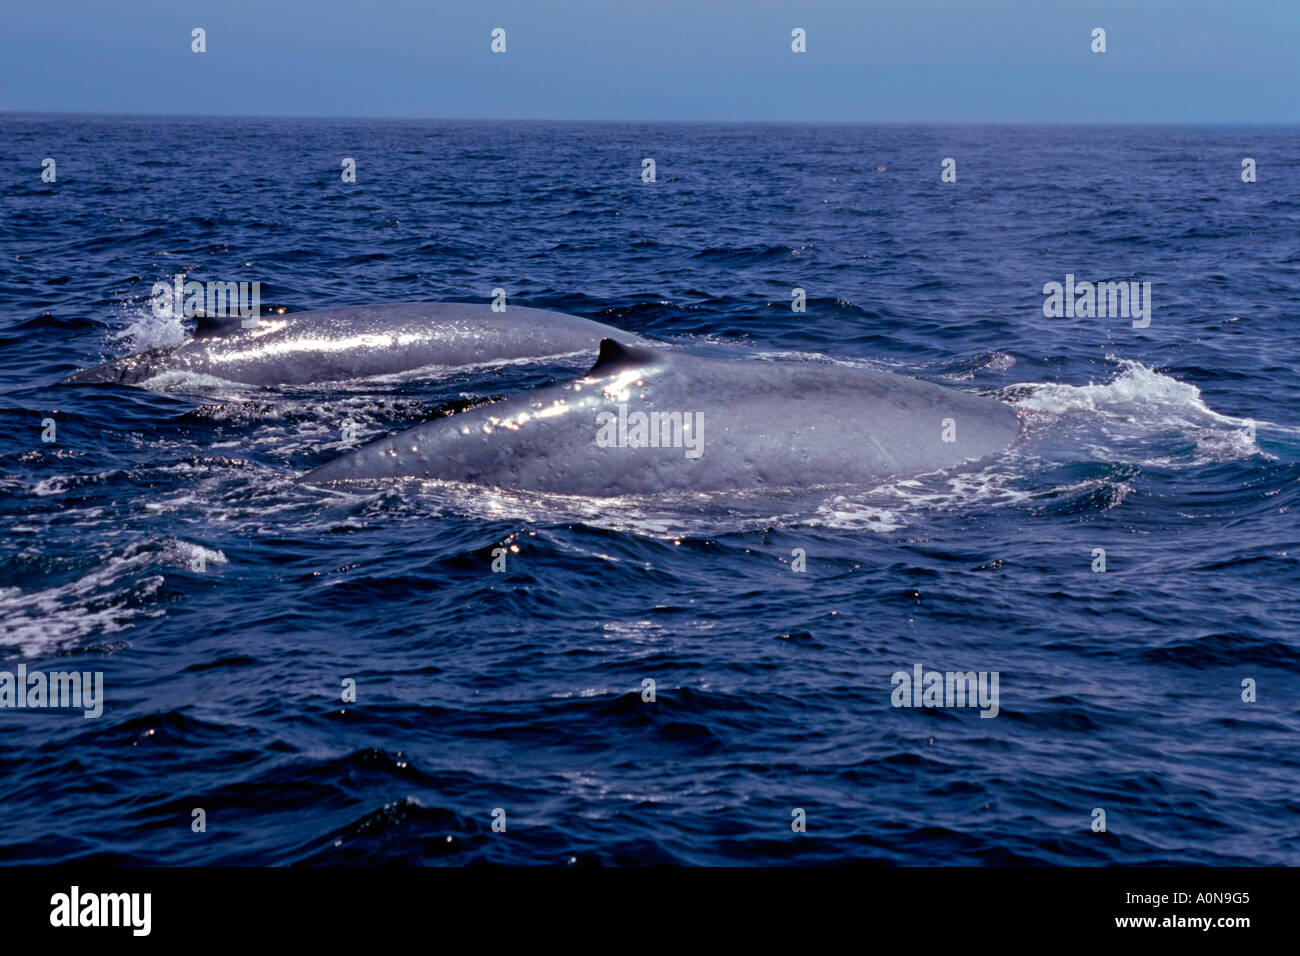 Blue whales, Balaenoptera musculus, surface off the coast of California, USA. Stock Photo